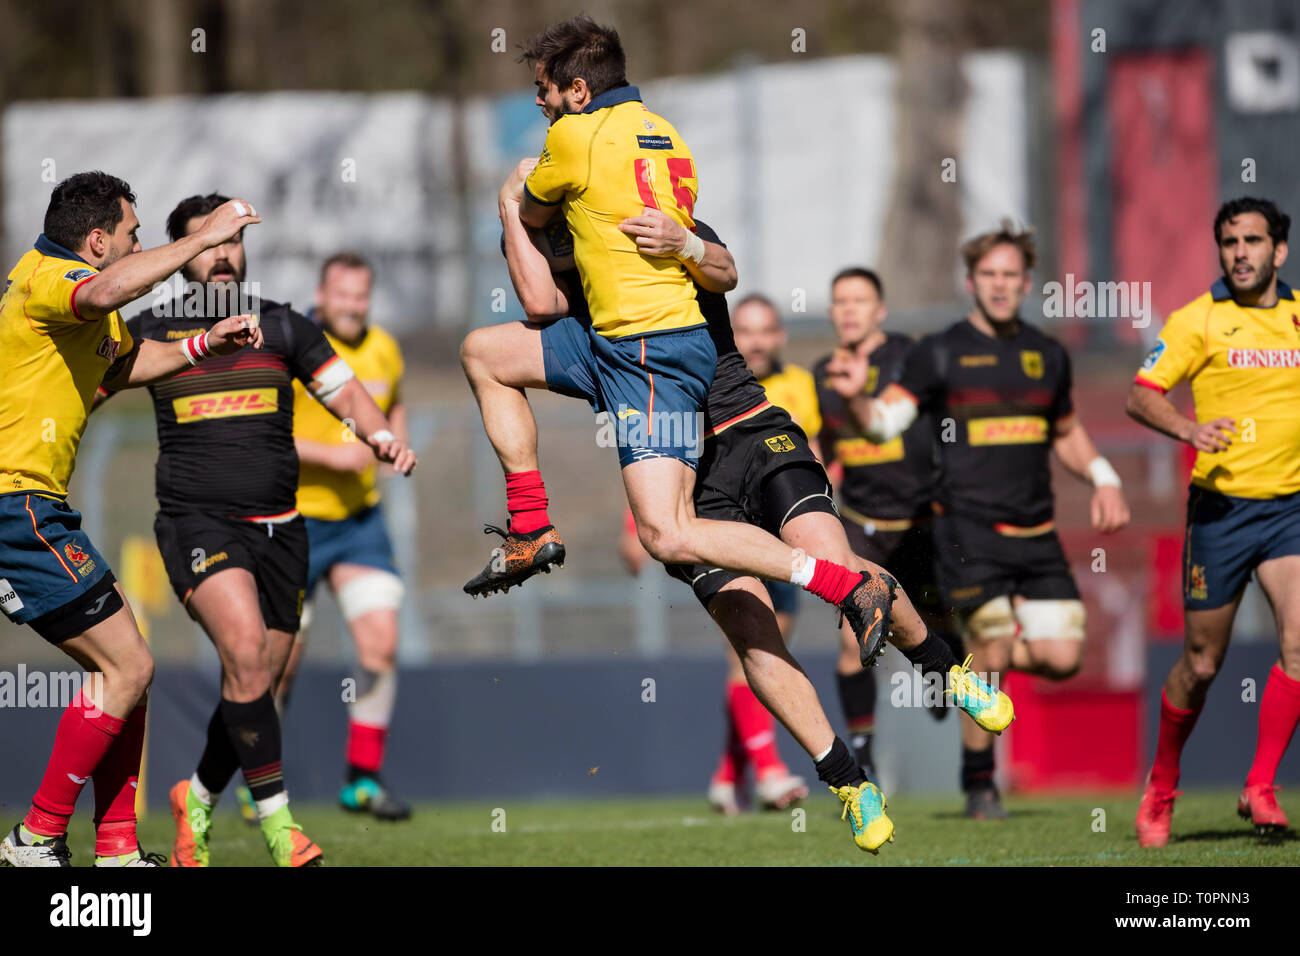 17 March 2019, North Rhine-Westphalia, Köln: Richard Stewart (Spain, 15) is attacked in the air by Vito Lammers (Germany, 13) when he receives the ball. Fifth match of the Rugby Europe Championship 2019: Germany-Spain on 17.03.2019 in Cologne. Photo: Jürgen Kessler/dpa Stock Photo